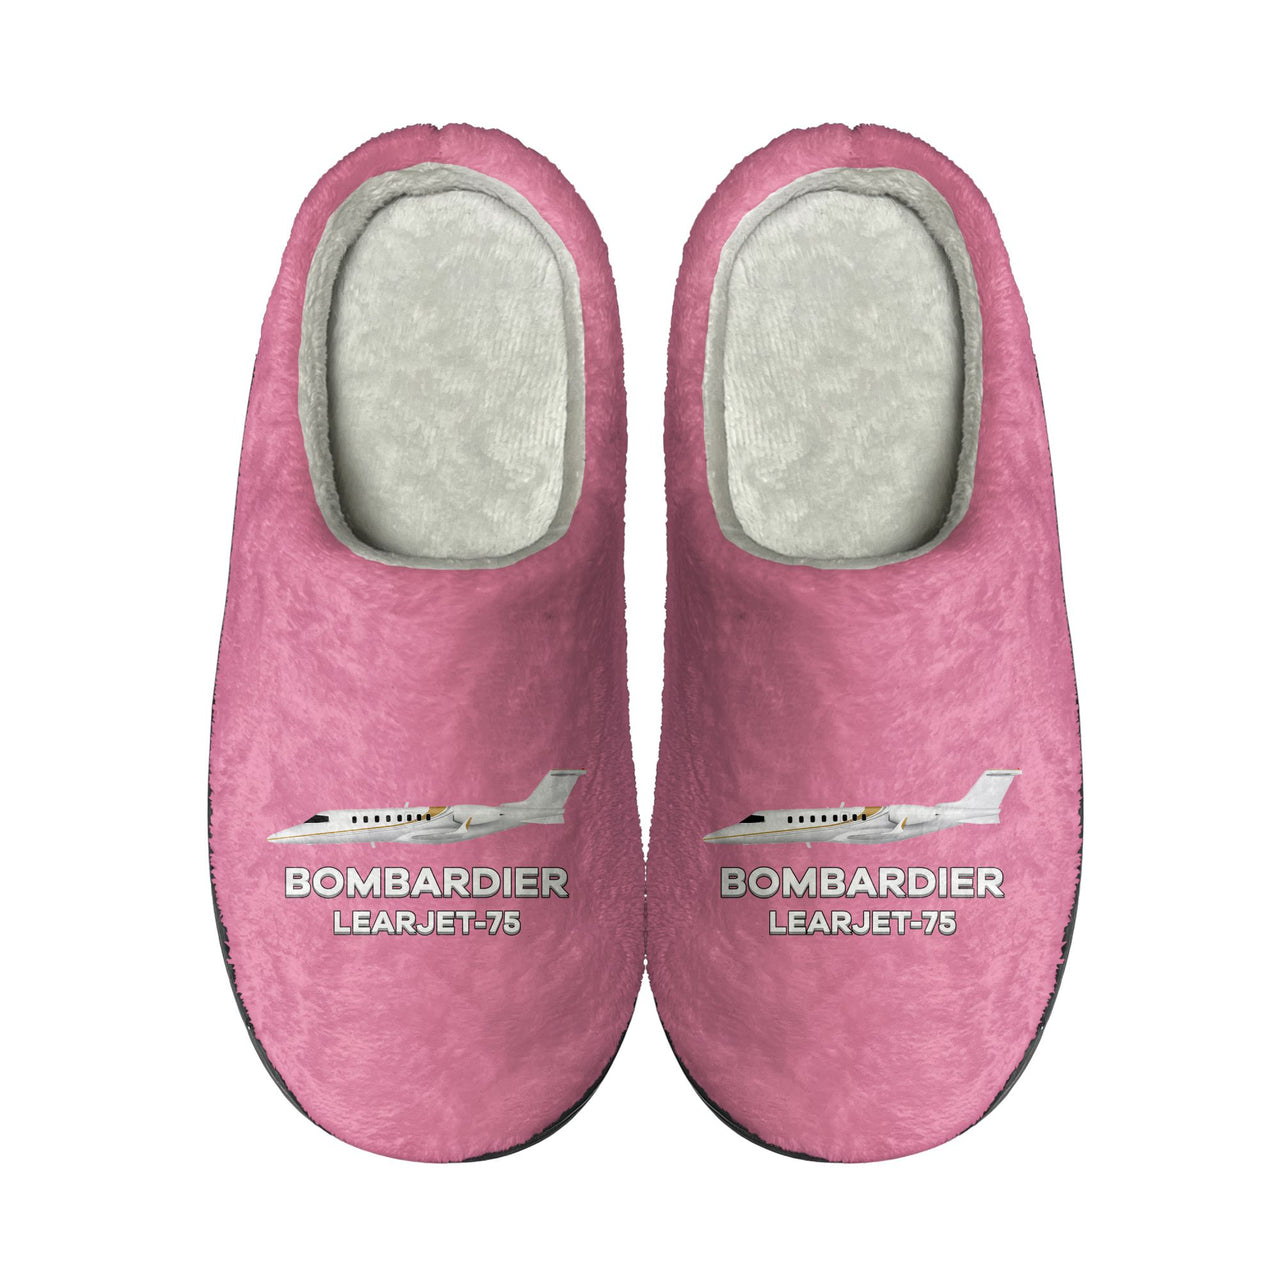 The Bombardier Learjet 75 Designed Cotton Slippers